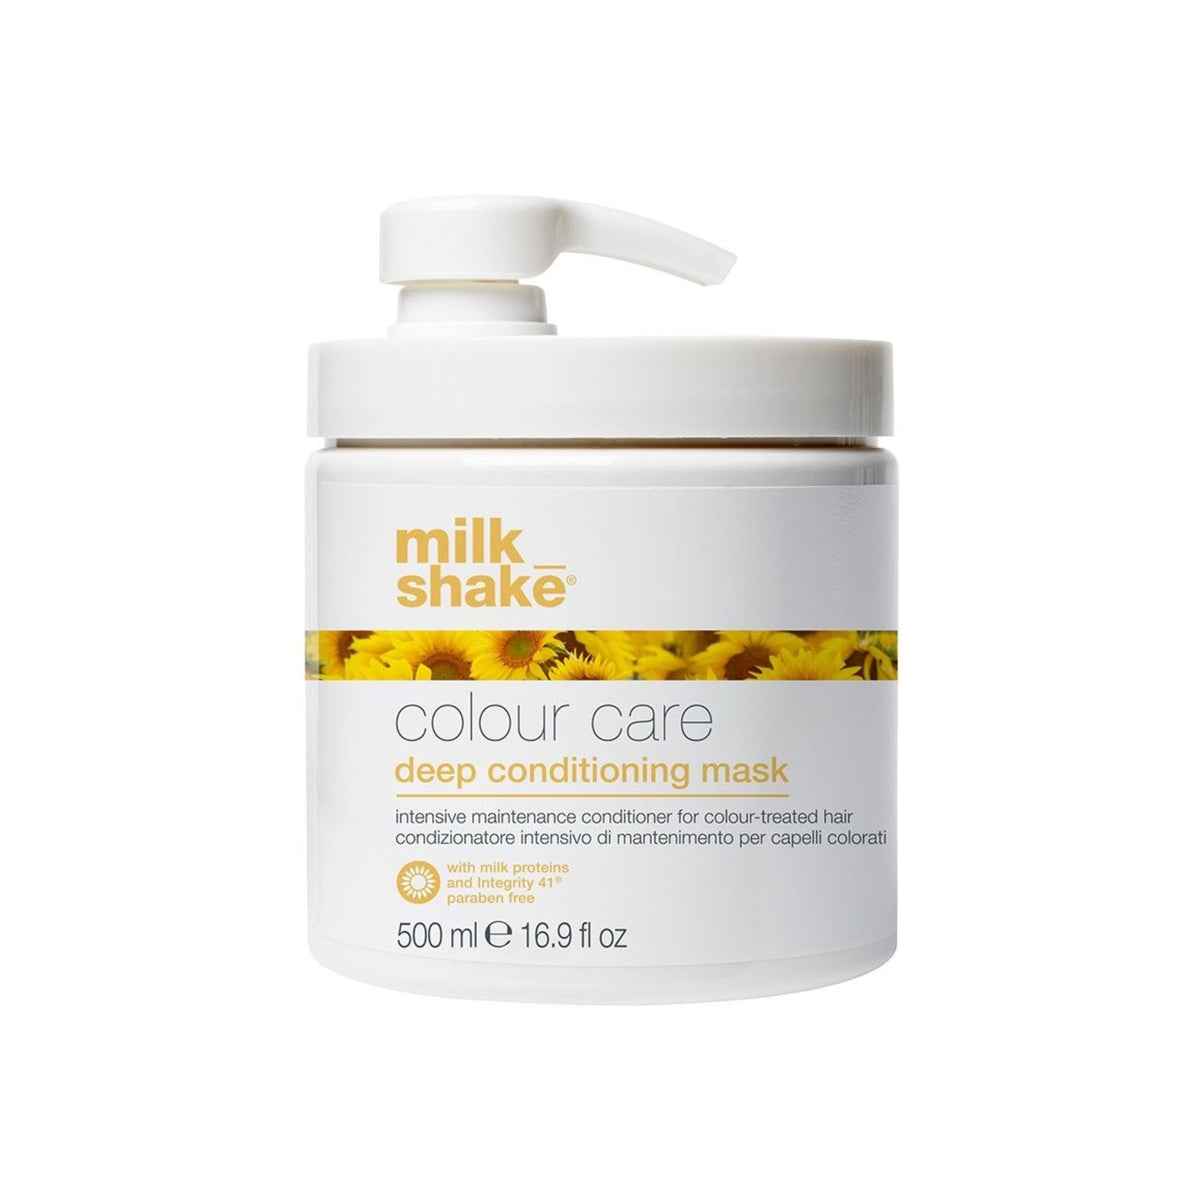 milk_shake colour care deep conditioning mask - Haircare Superstore